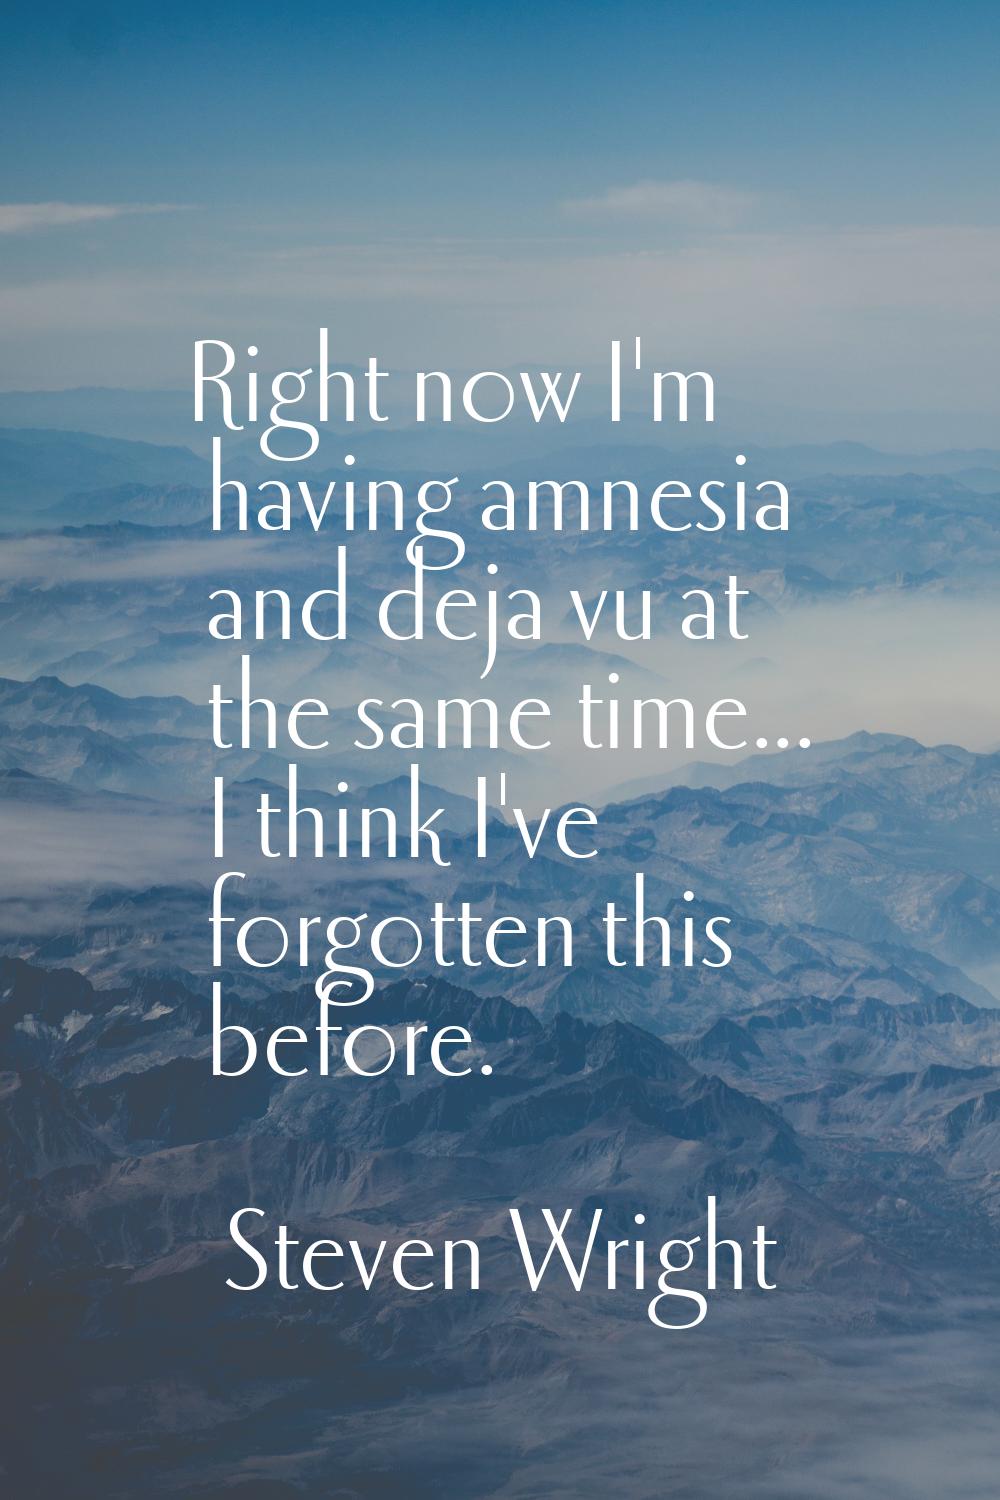 Right now I'm having amnesia and deja vu at the same time... I think I've forgotten this before.